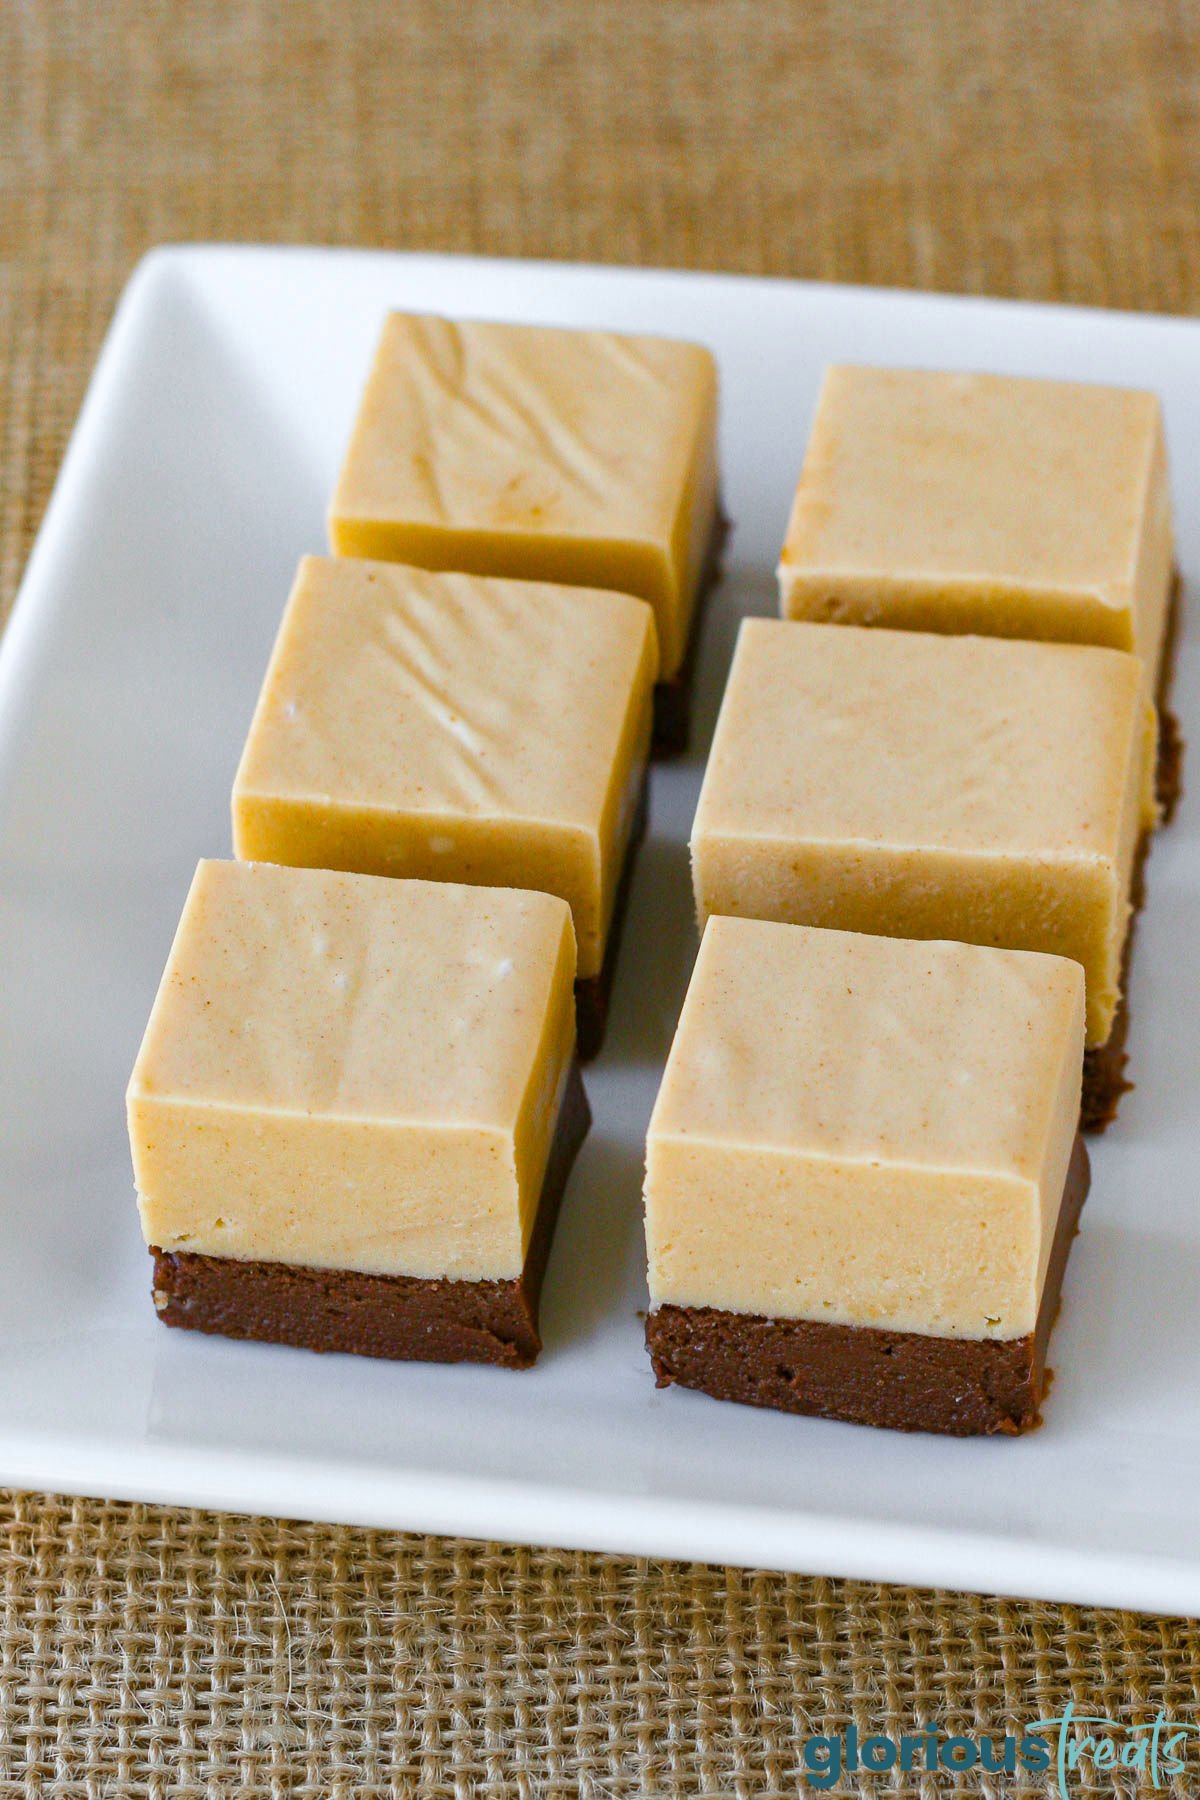 six pieces of chocolate peanut butter fudge on a white tray.